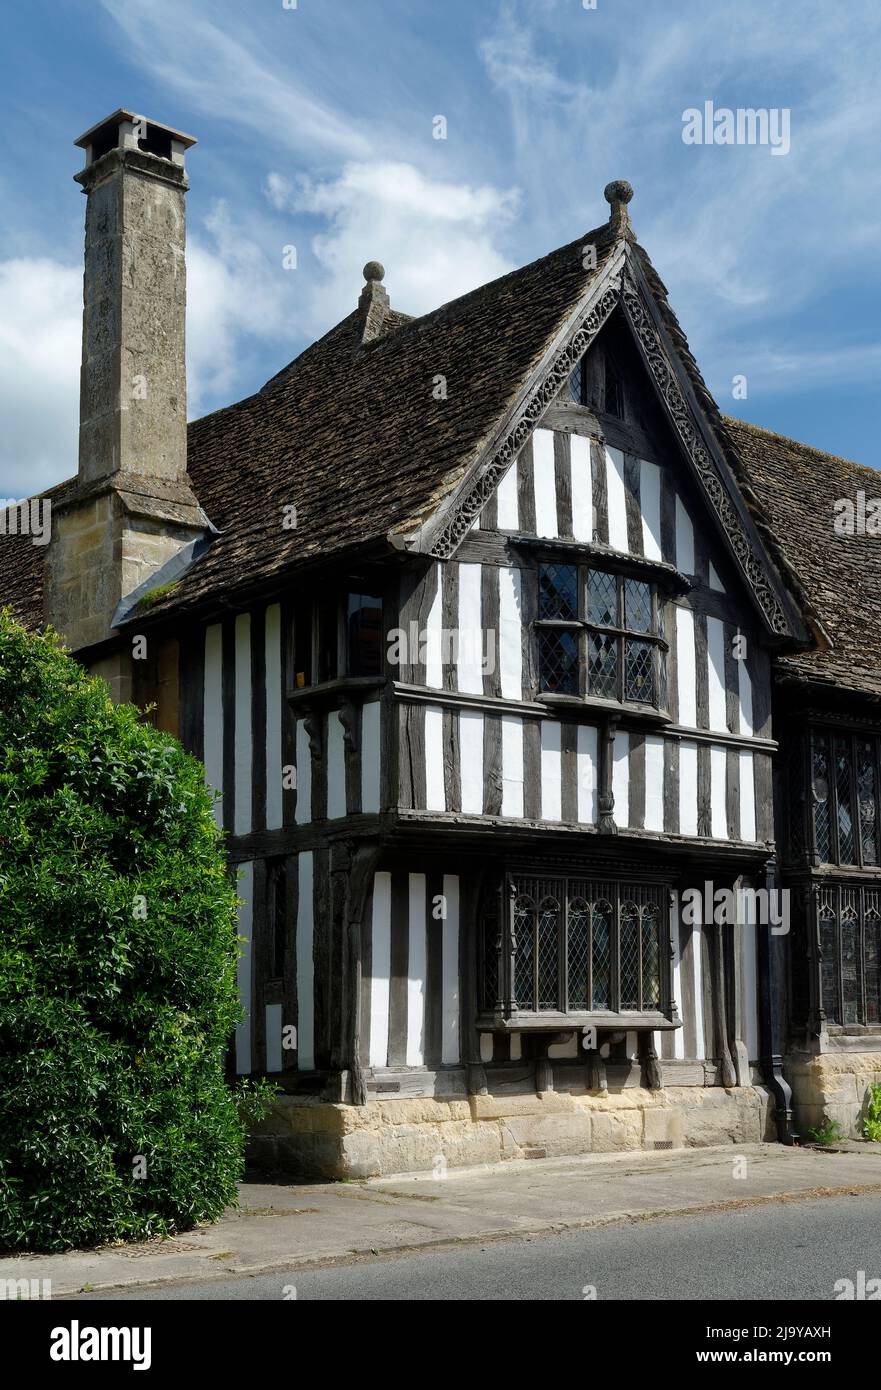 Porch House, Potterne, Wiltshire UK. 15th century grade I listed timber framed house Stock Photo